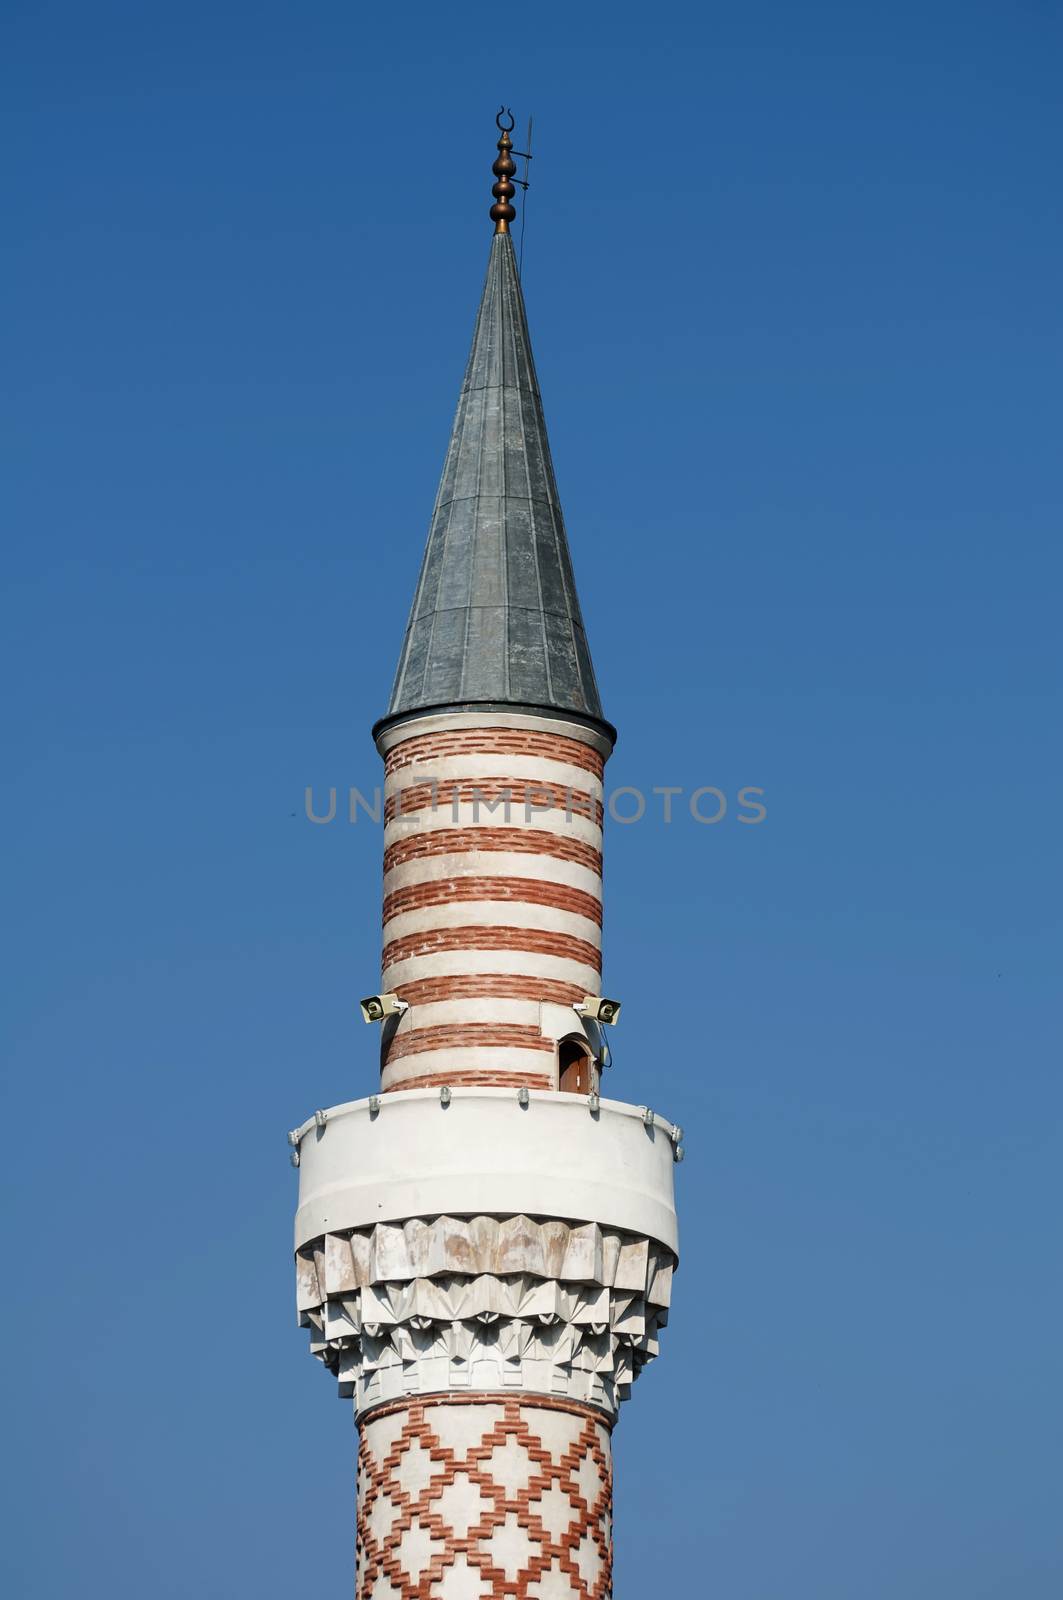 Minaret of the Mosque on blue sky background